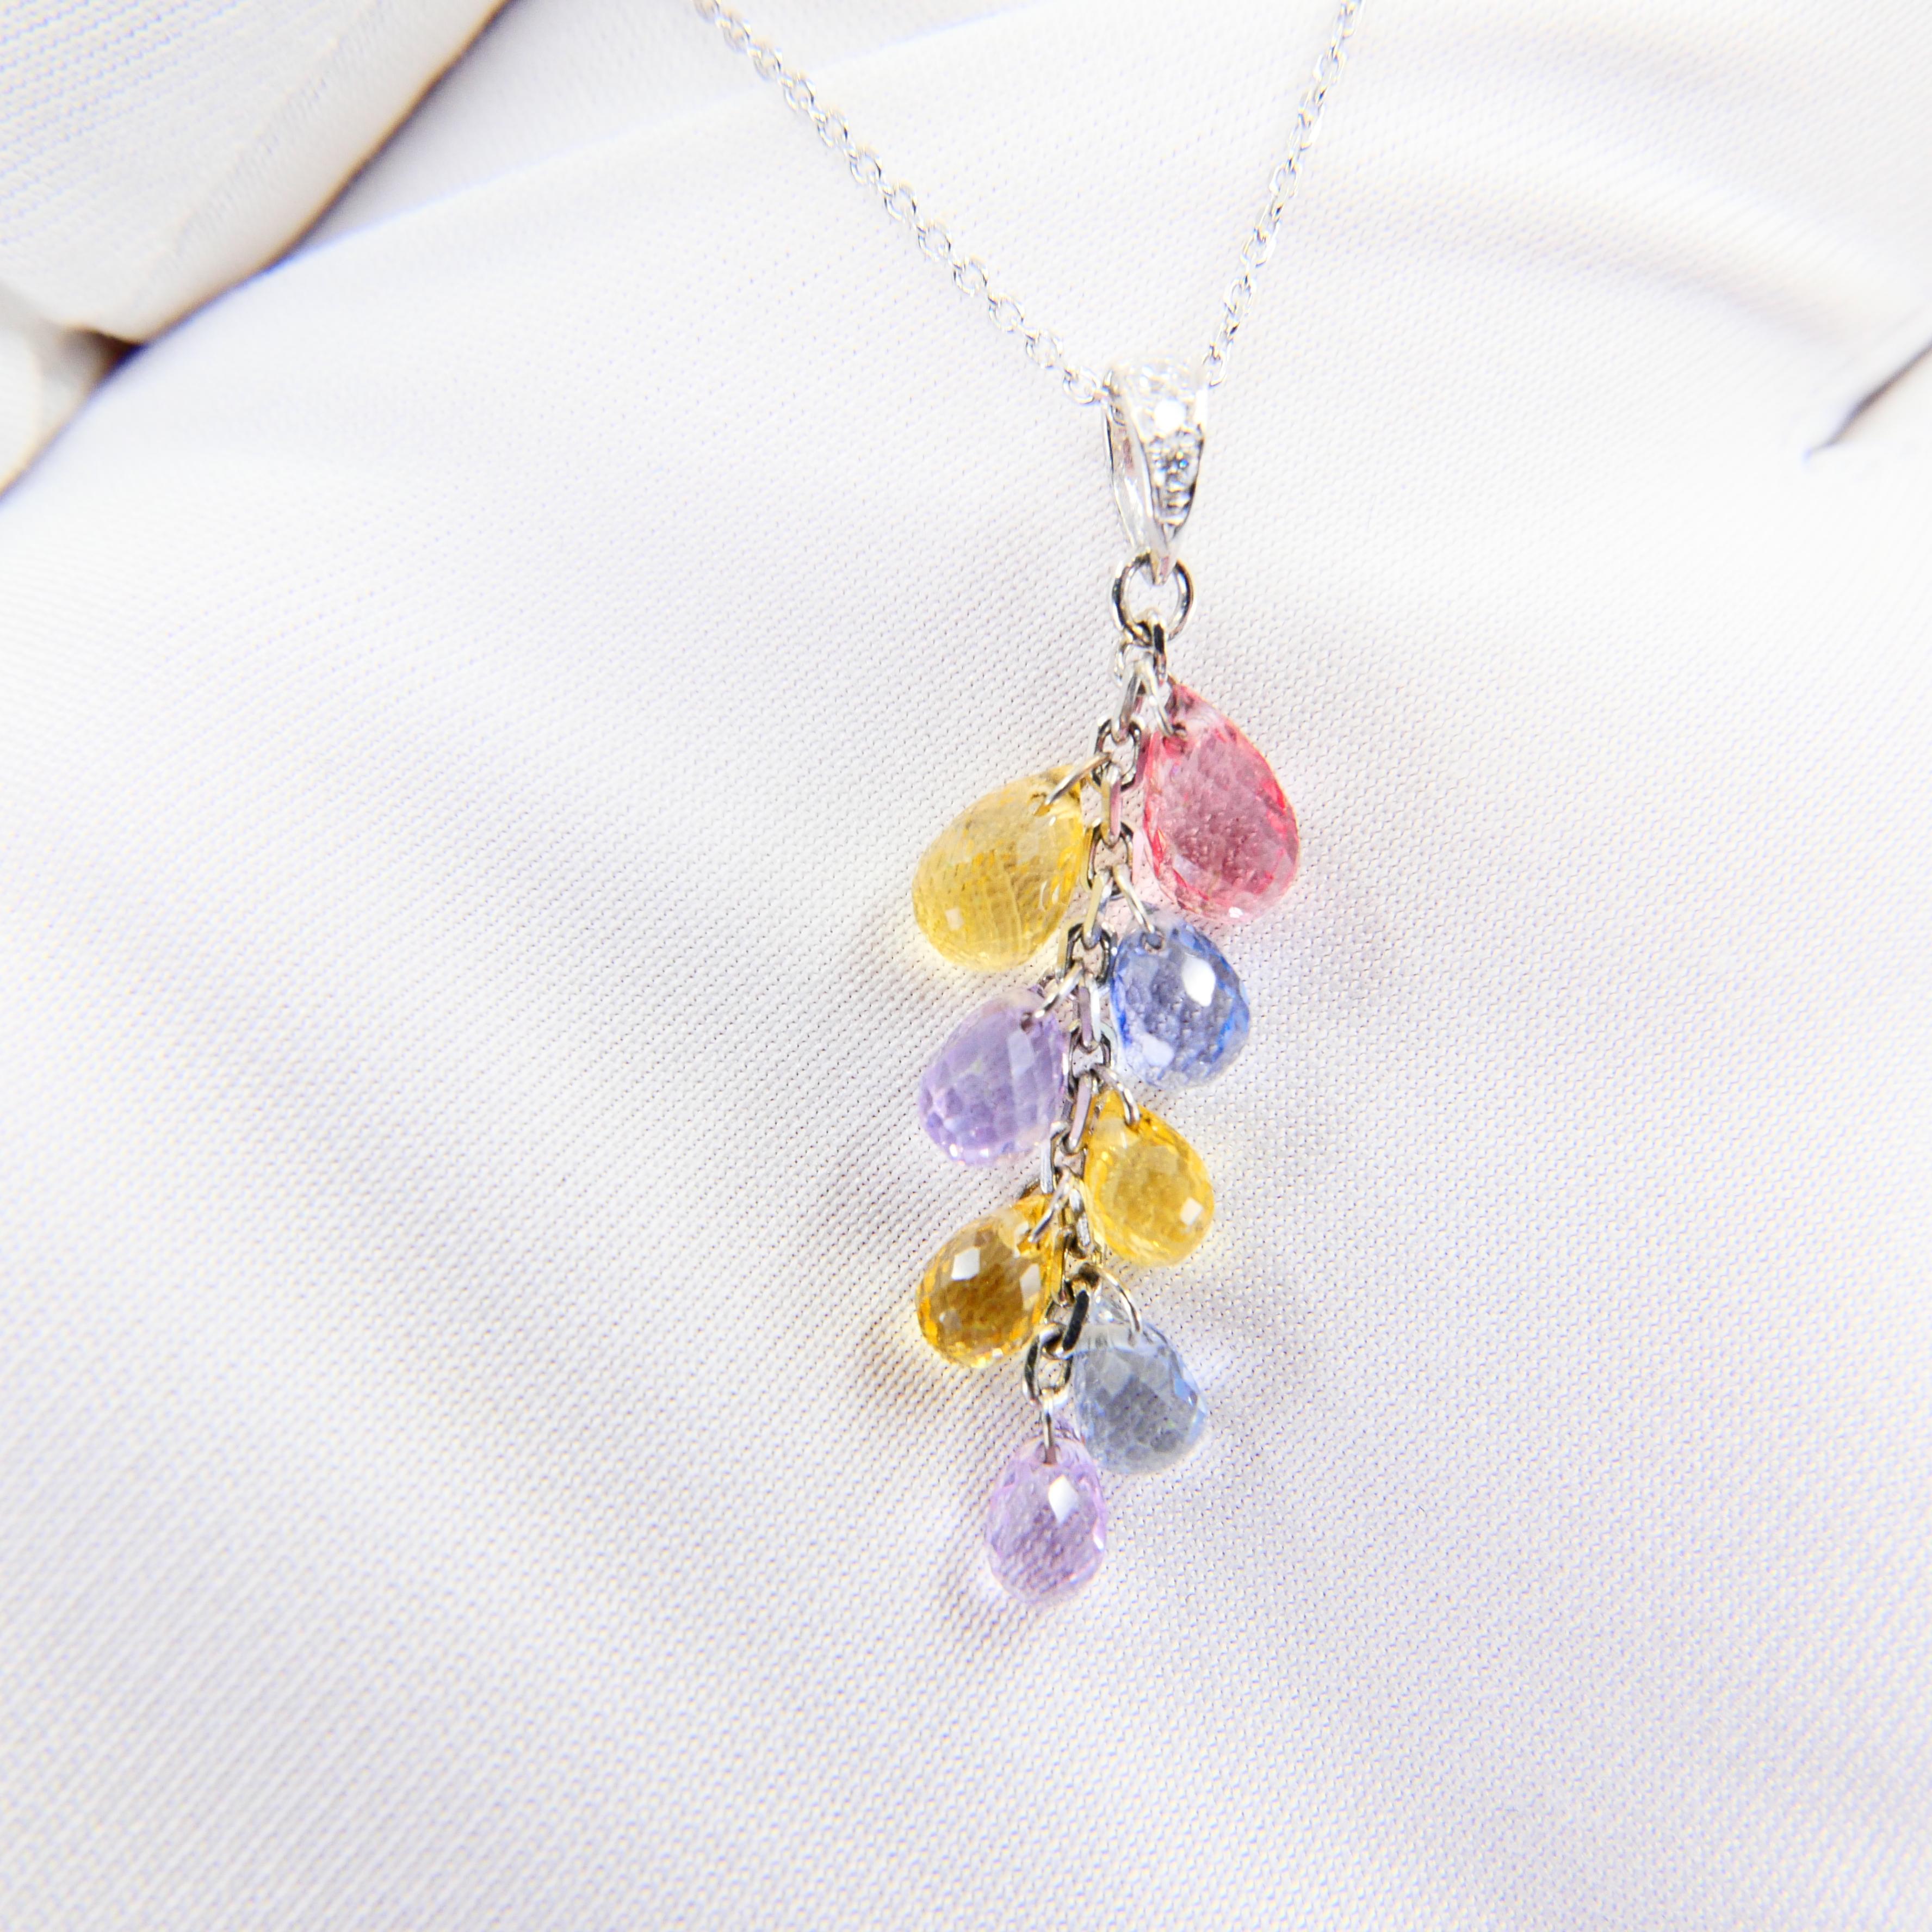 Muti Colored Briolette Cut Sapphires & Diamond Pendant Drop Necklace In New Condition For Sale In Hong Kong, HK